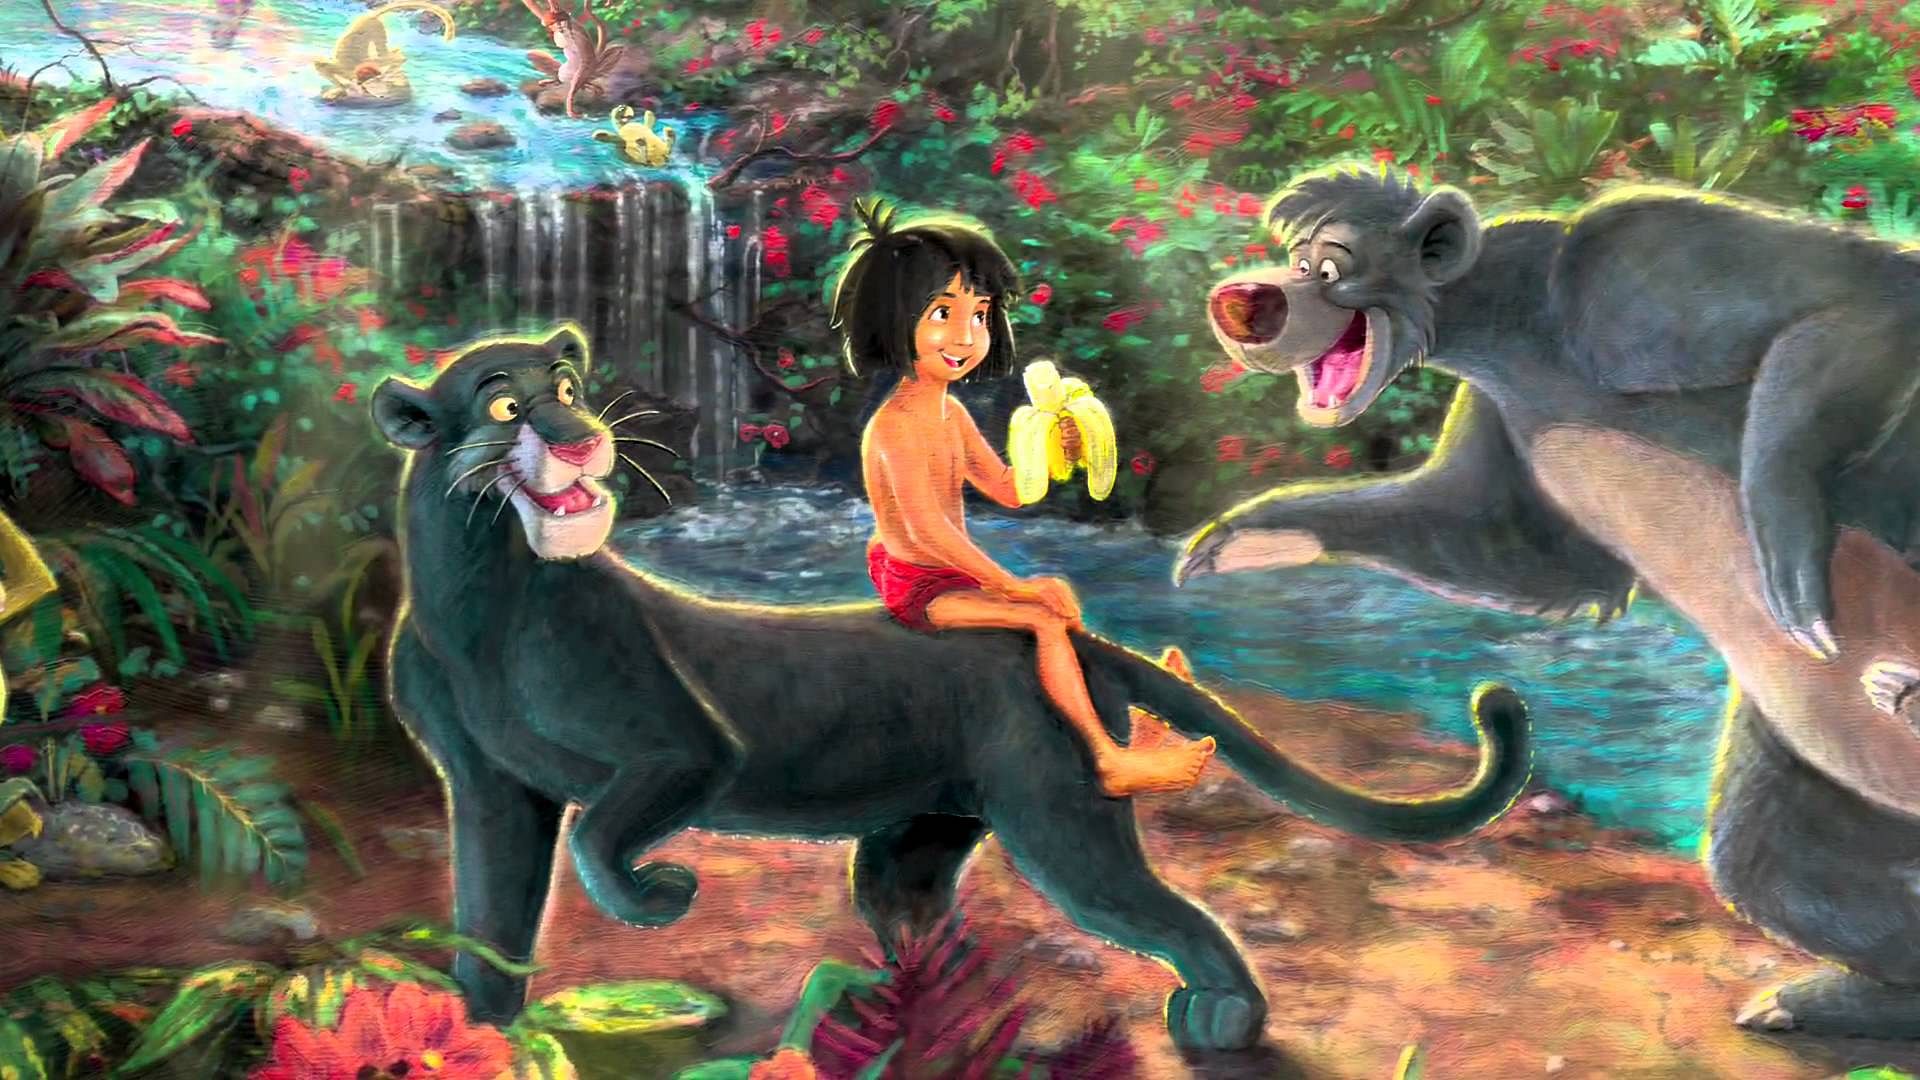 The Jungle Book. Image used for representation only.